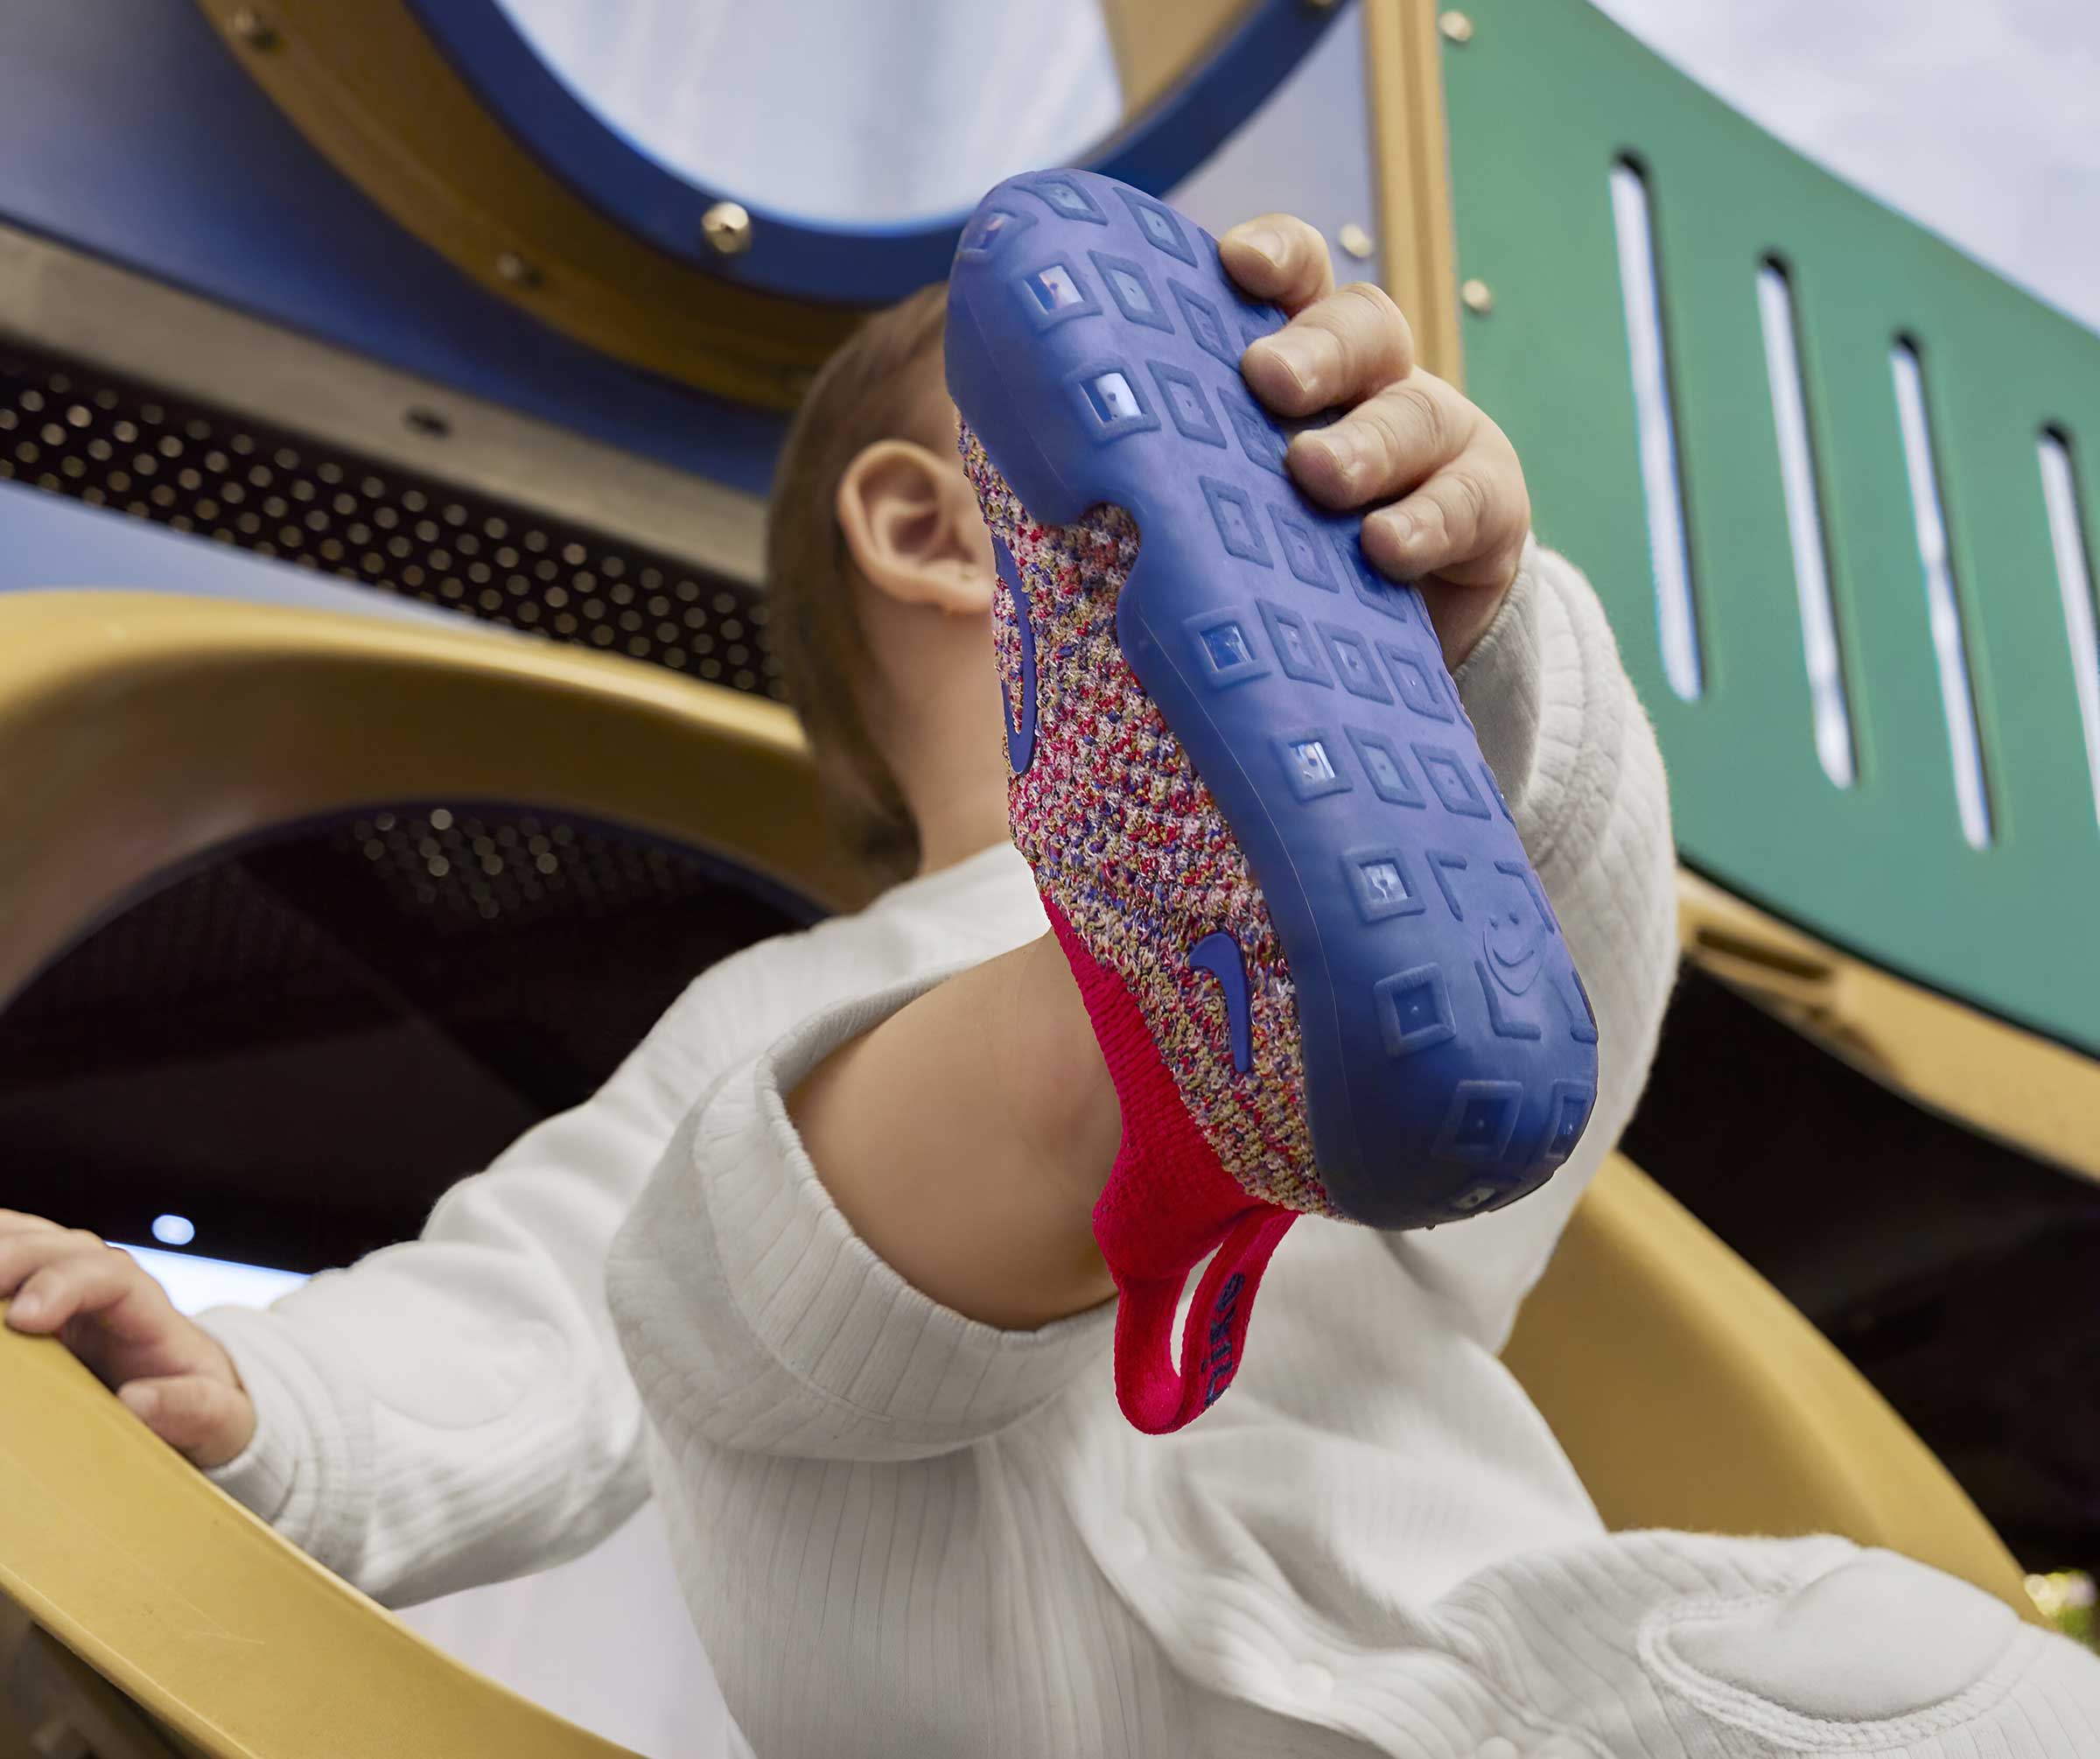 Nike launches 'Swoosh One', toddler shoe aimed at helping gait of early  walkers